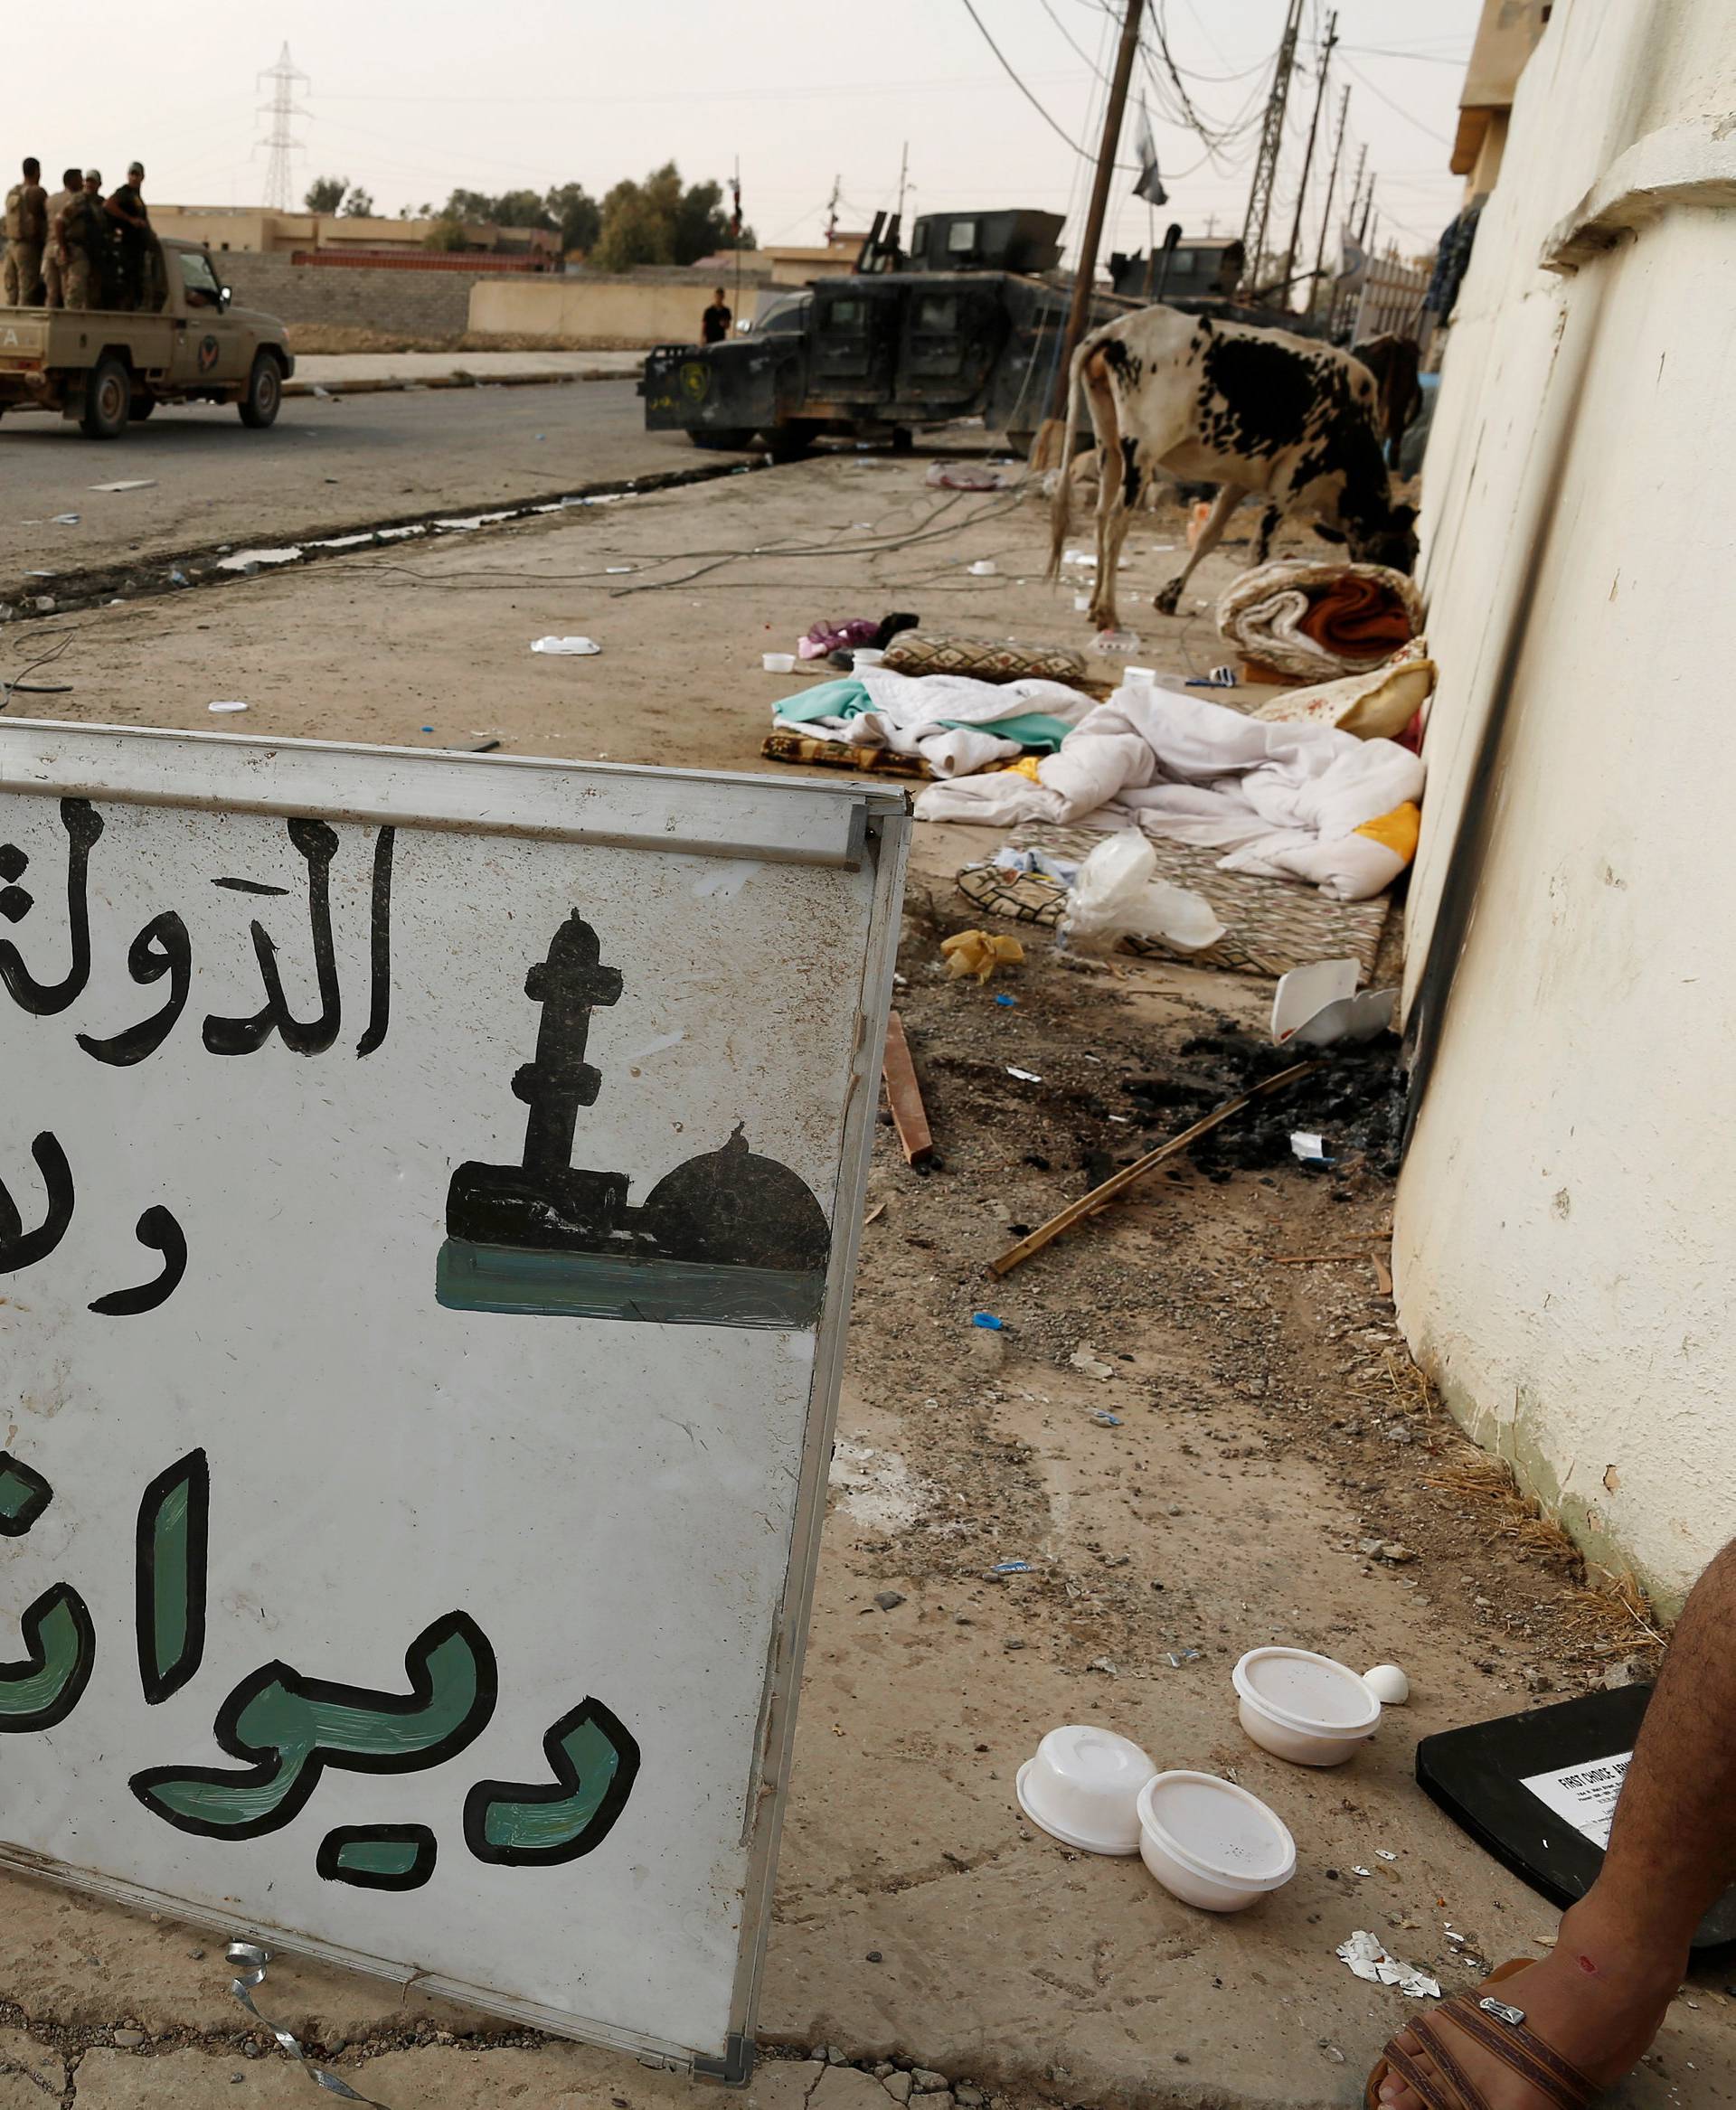 A sign which reads "Islamic State, Nineveh Governorate, Council of Mosques" is seen along a street of the town of al-Shura